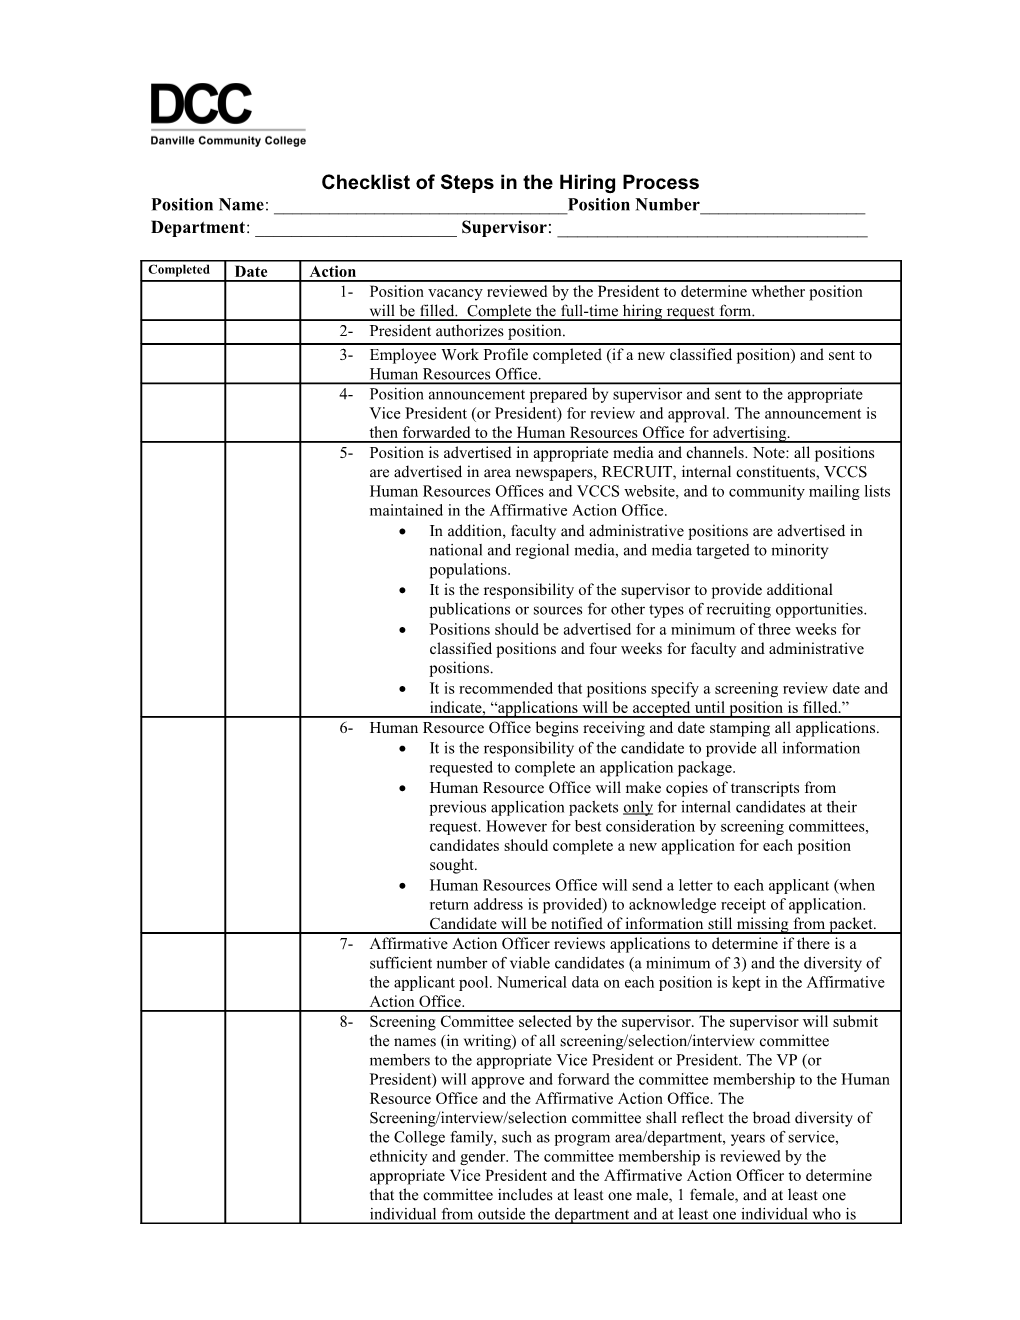 Checklist of Steps in the Hiring Procedures